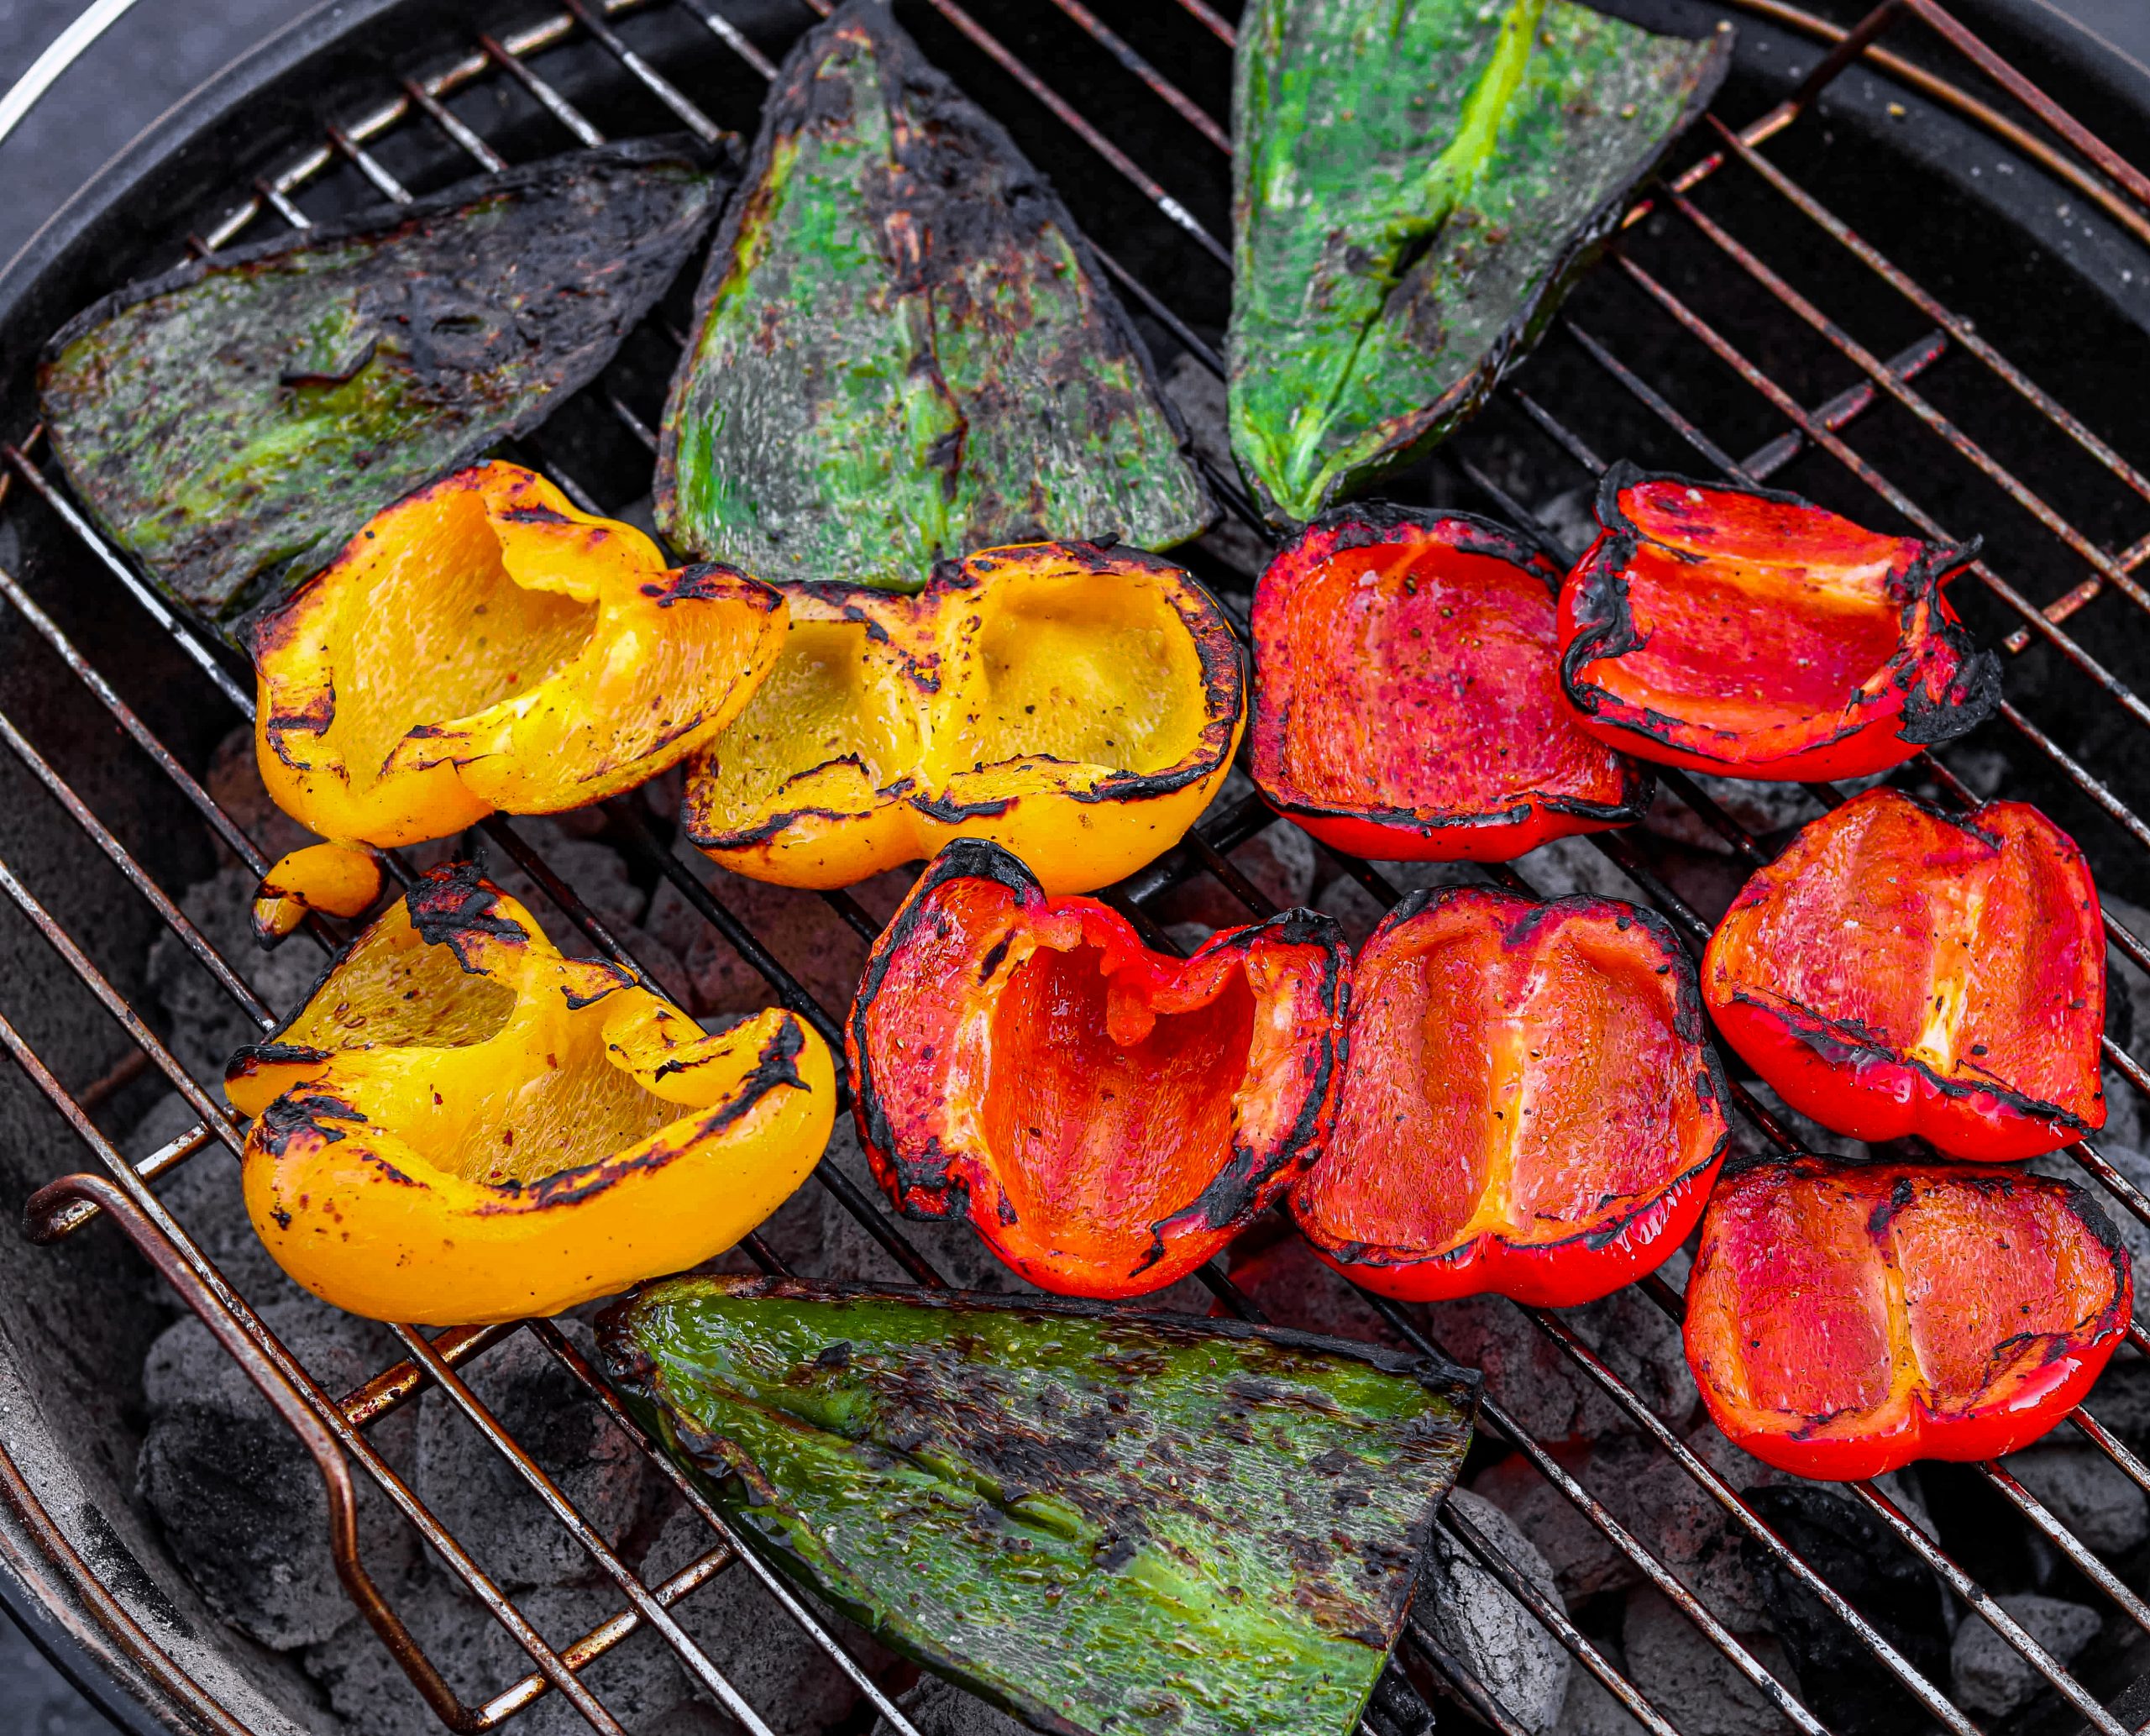 Then, grill peppers.